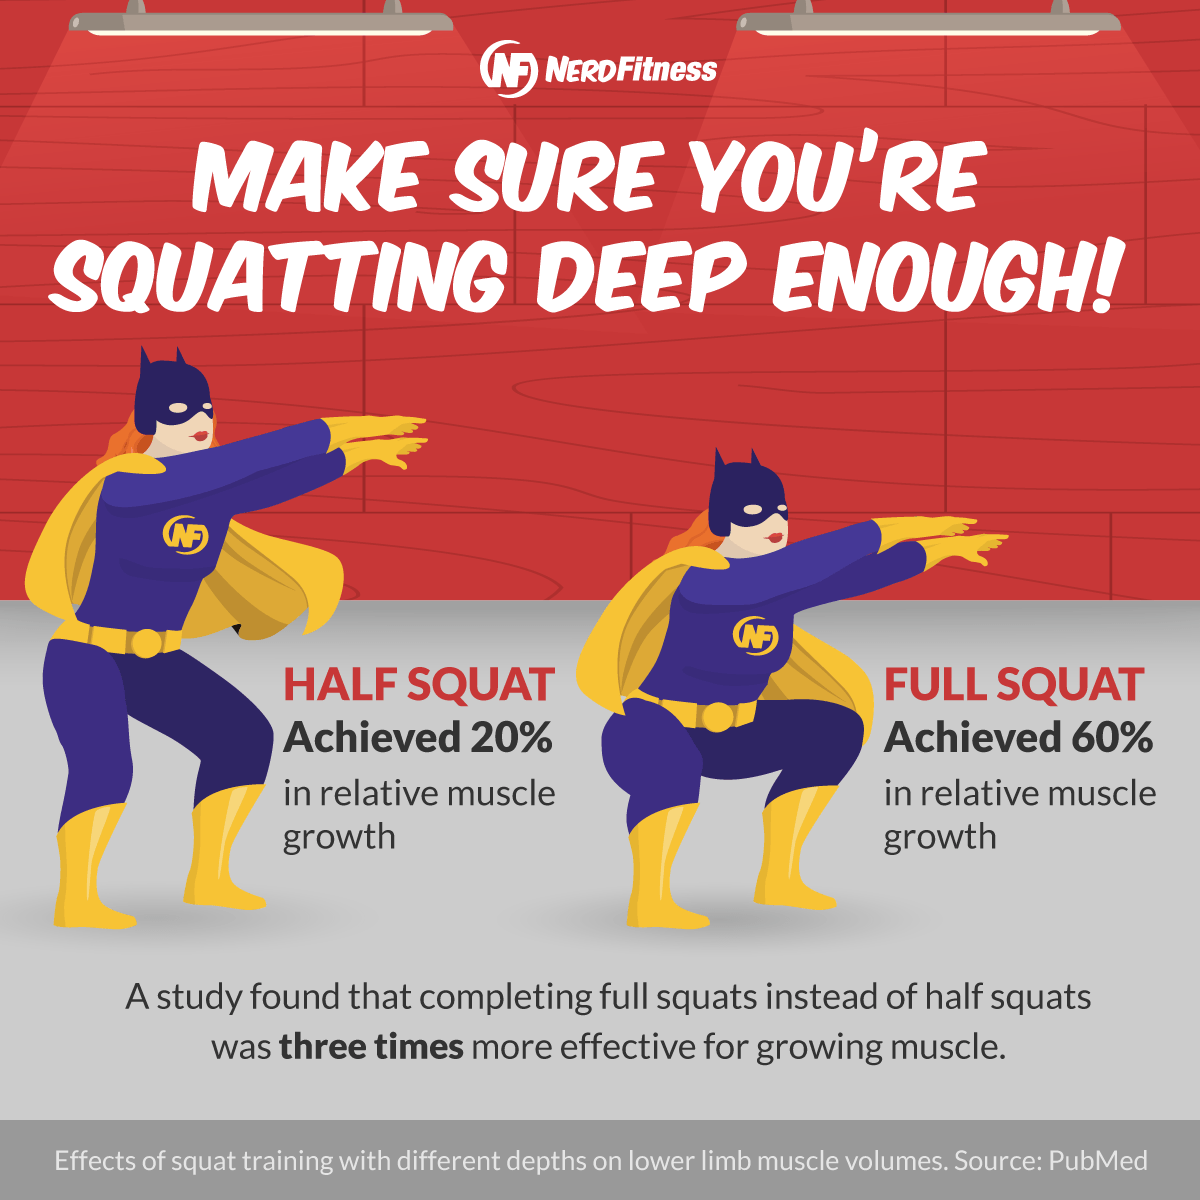 This infographic shows that a full squat will achieve three times the muscle growth as a half squat. 